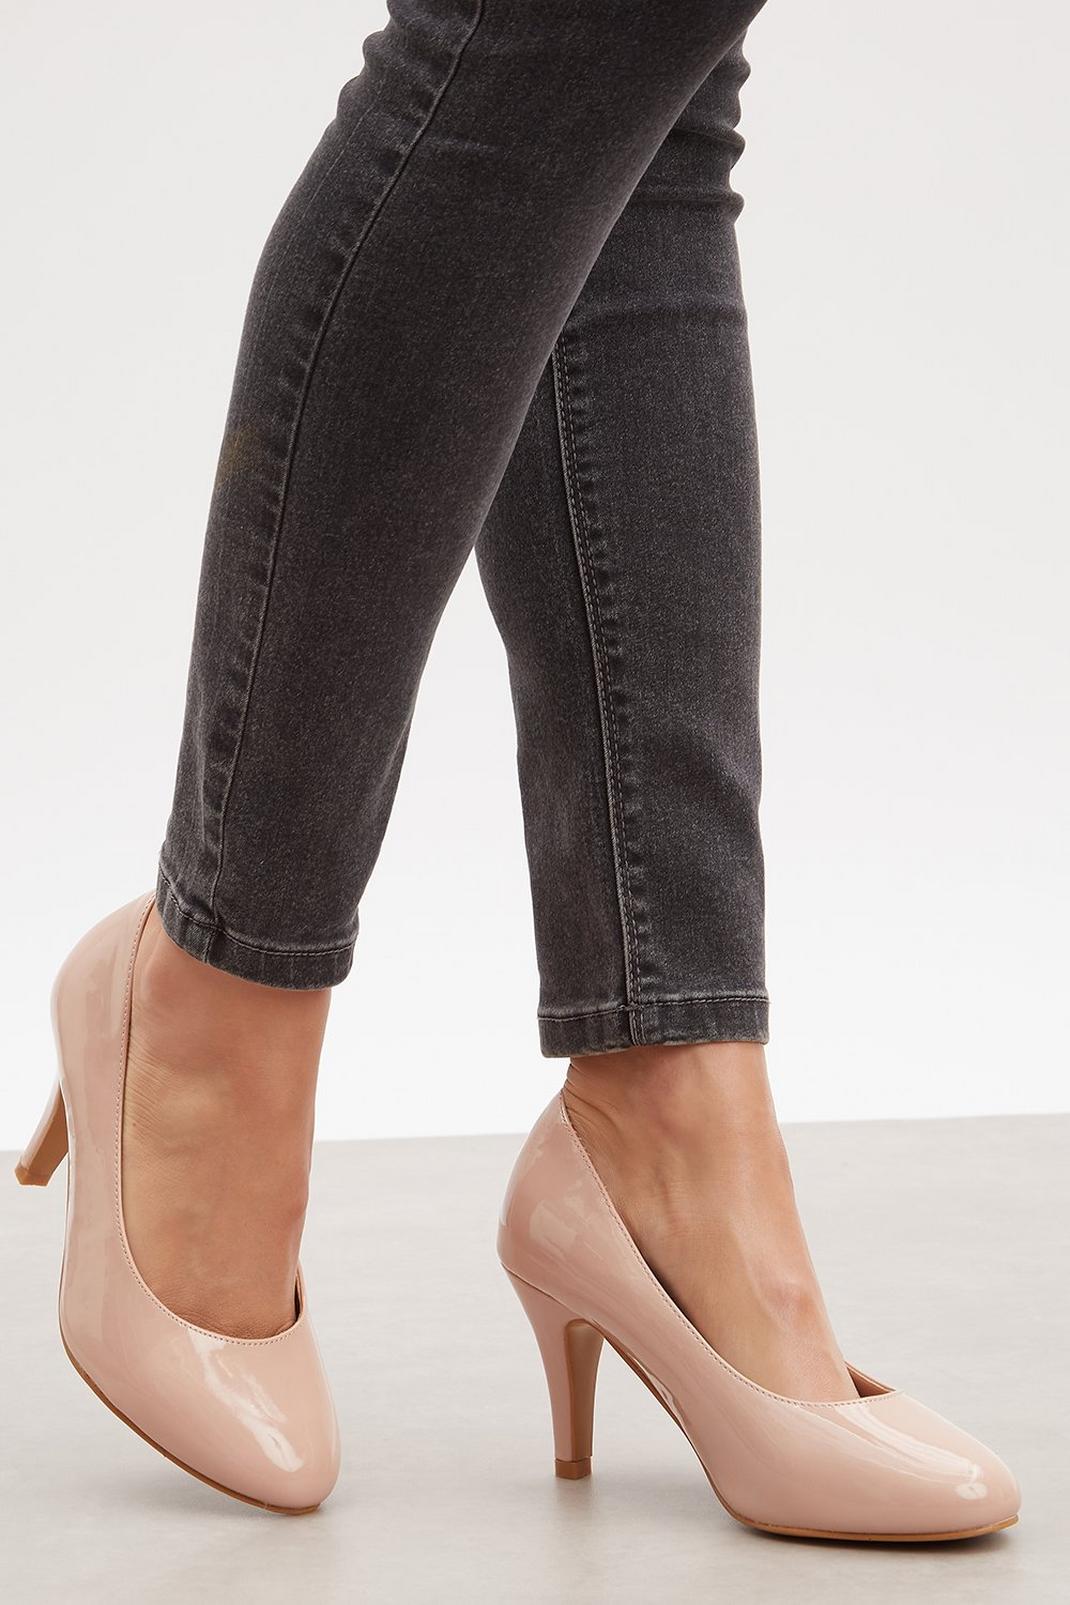 Nude Good For The Sole: Extra Wide Comfort Eloise Court Shoe image number 1